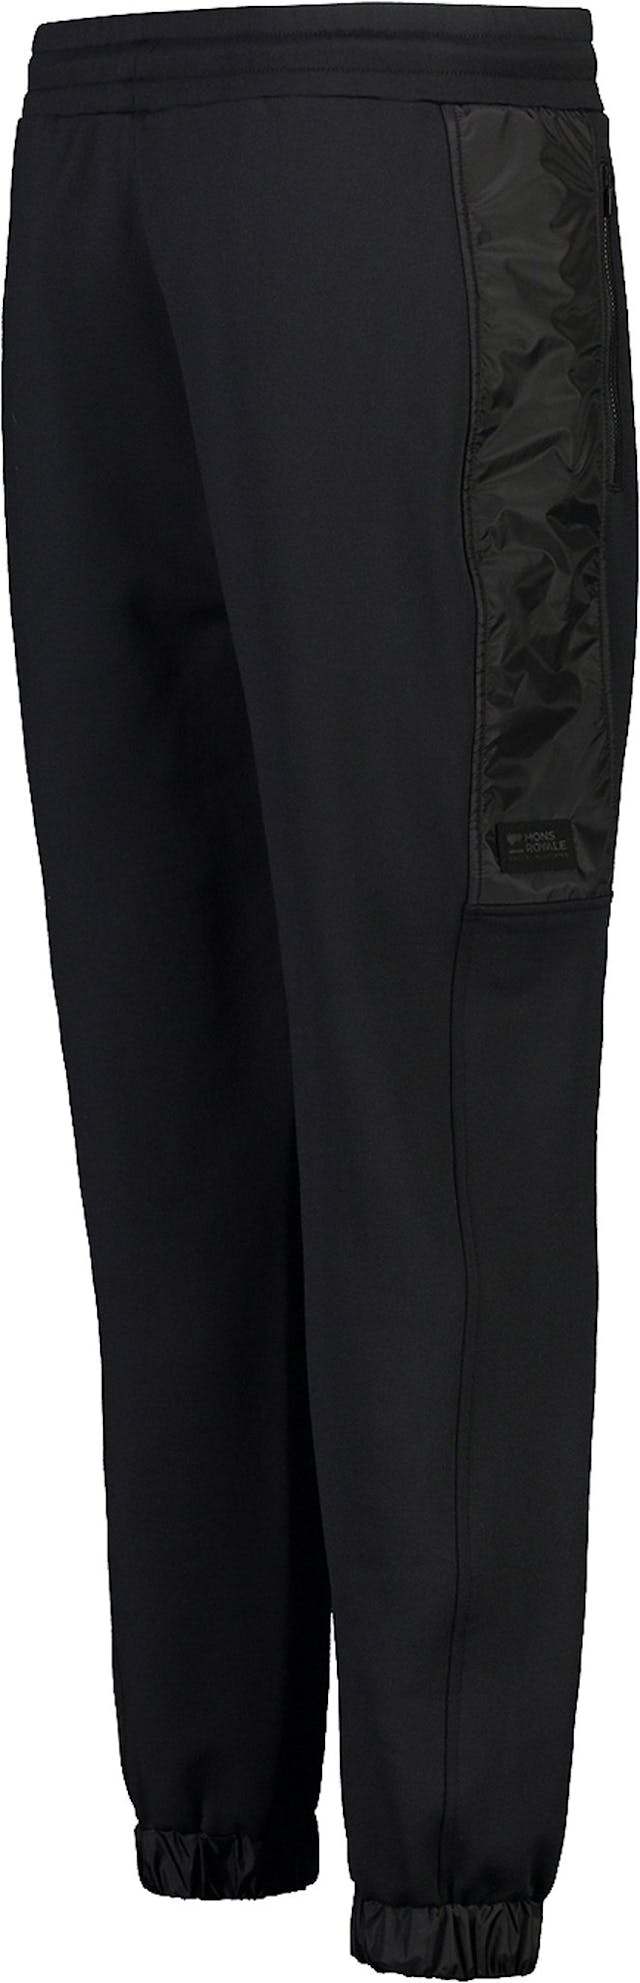 Product image for Decade Pant - Women's